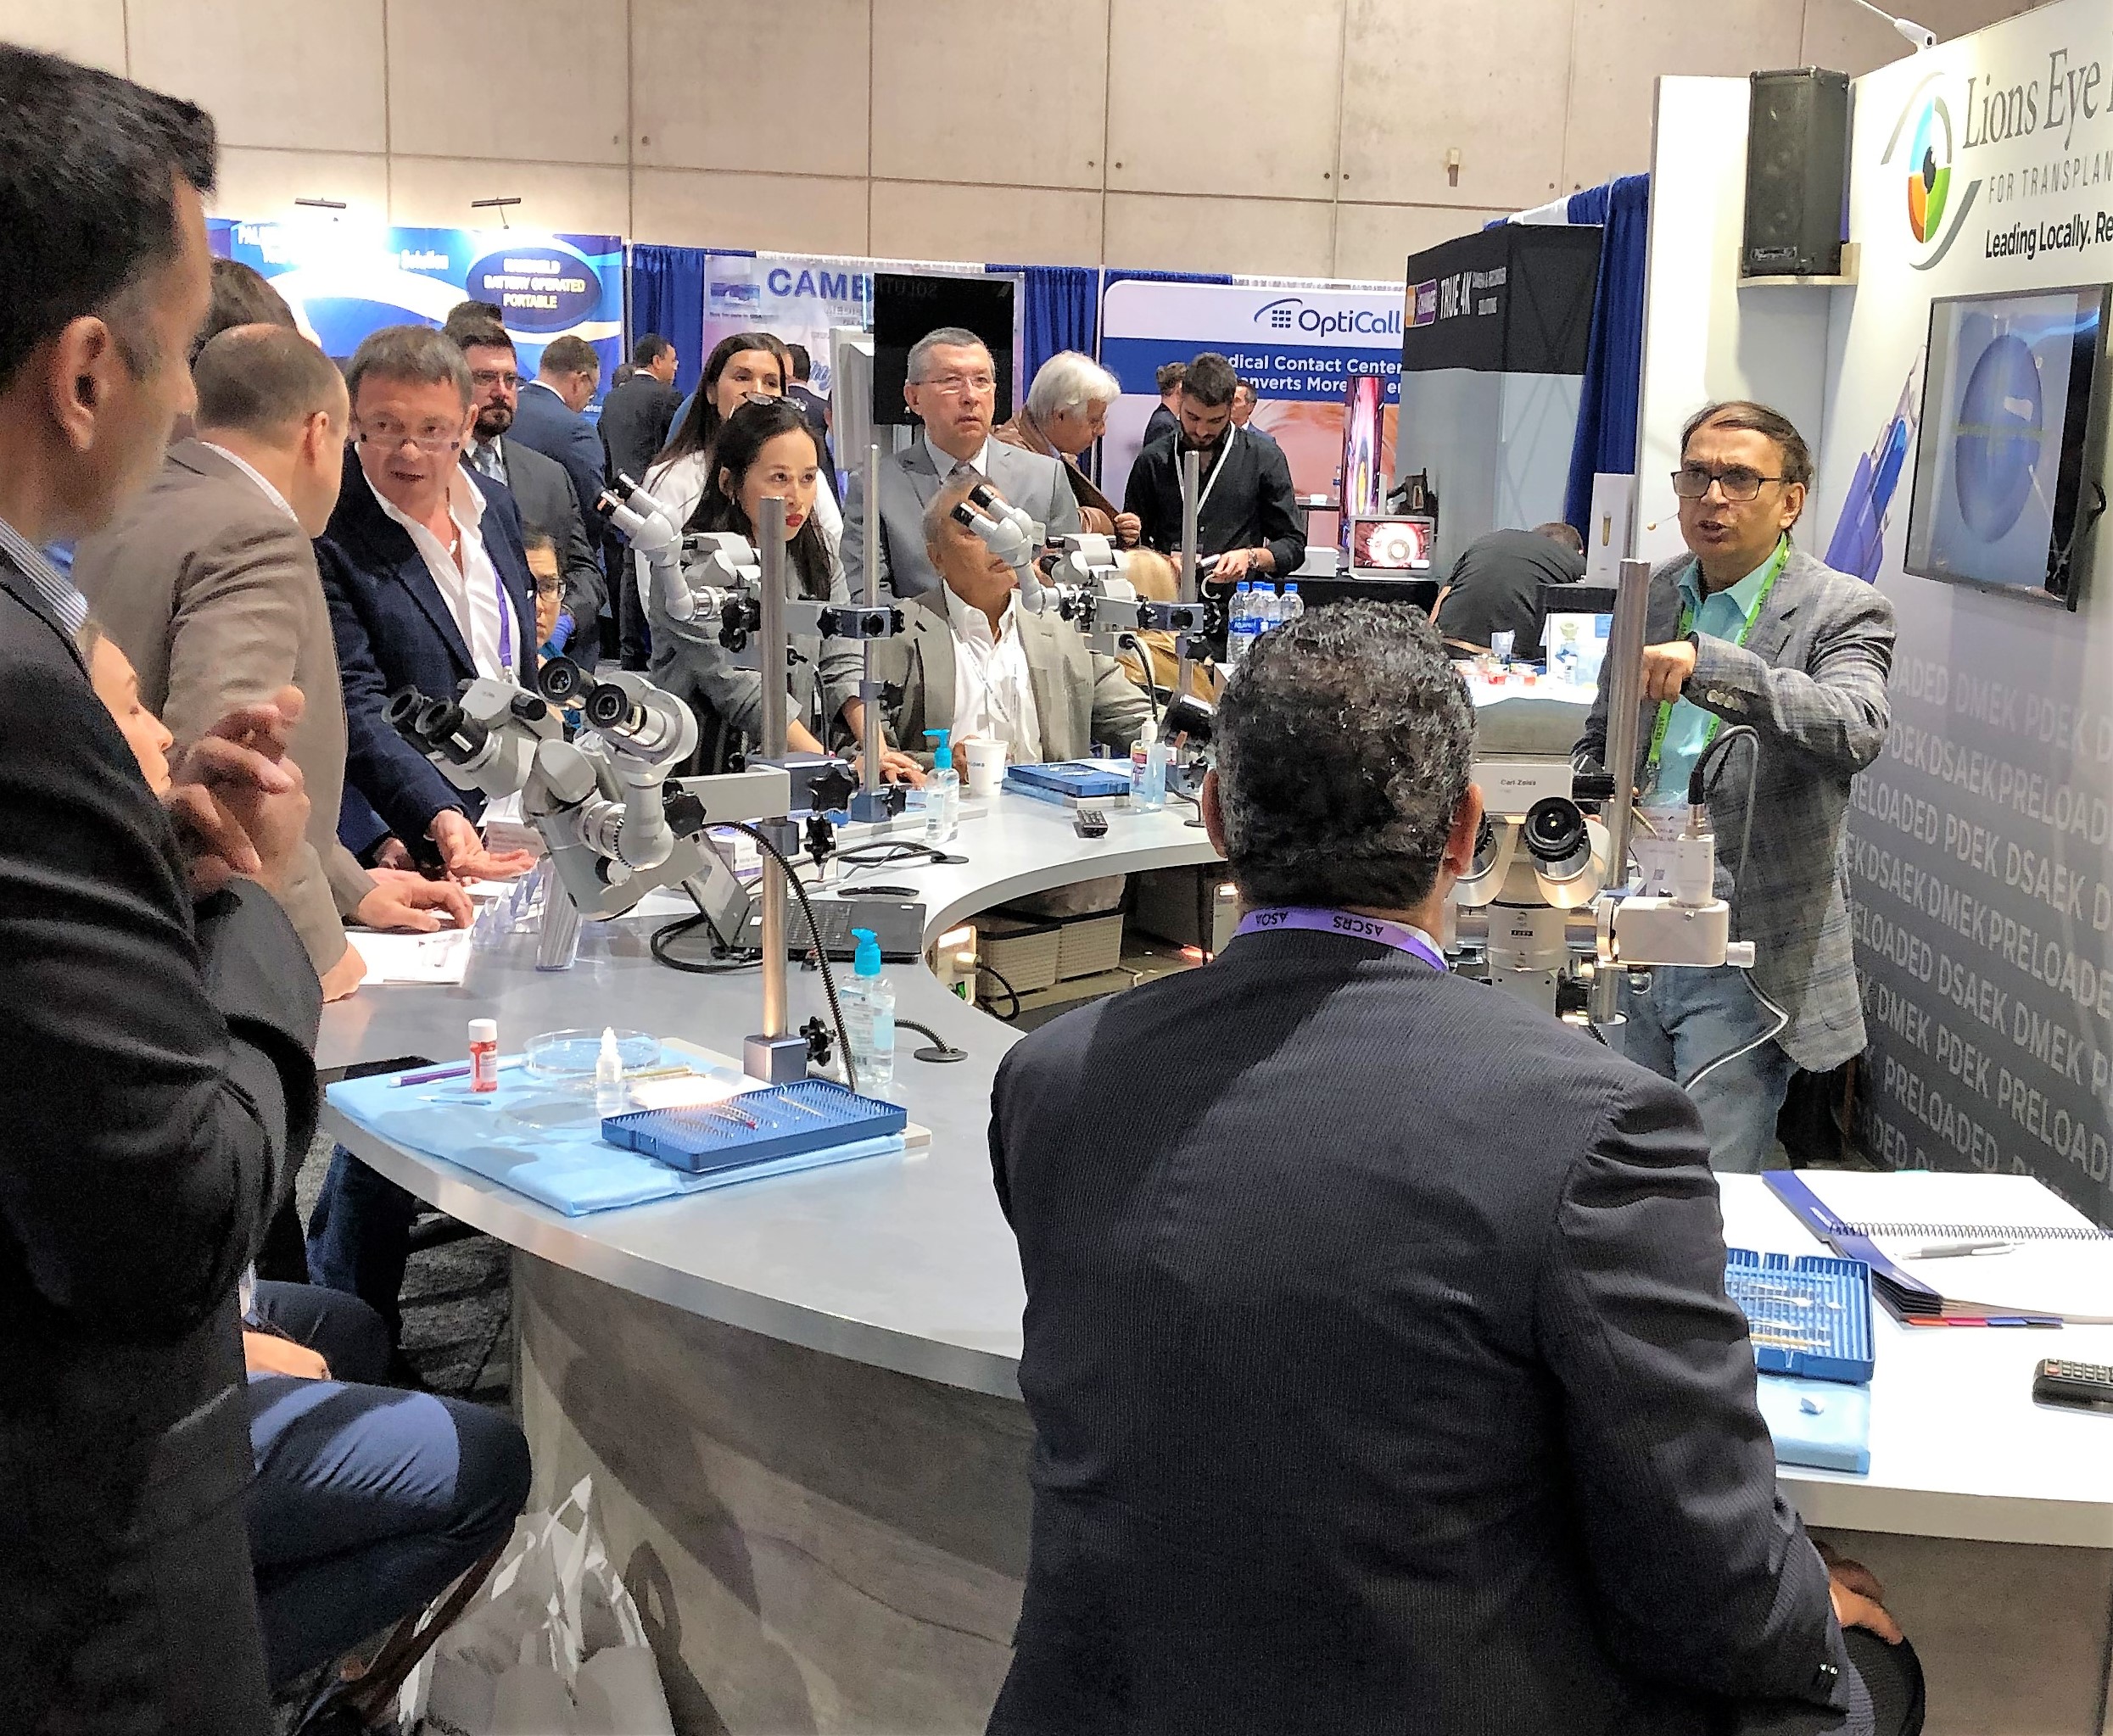 surgeon presenting to other surgeons on exhibit floor of convention